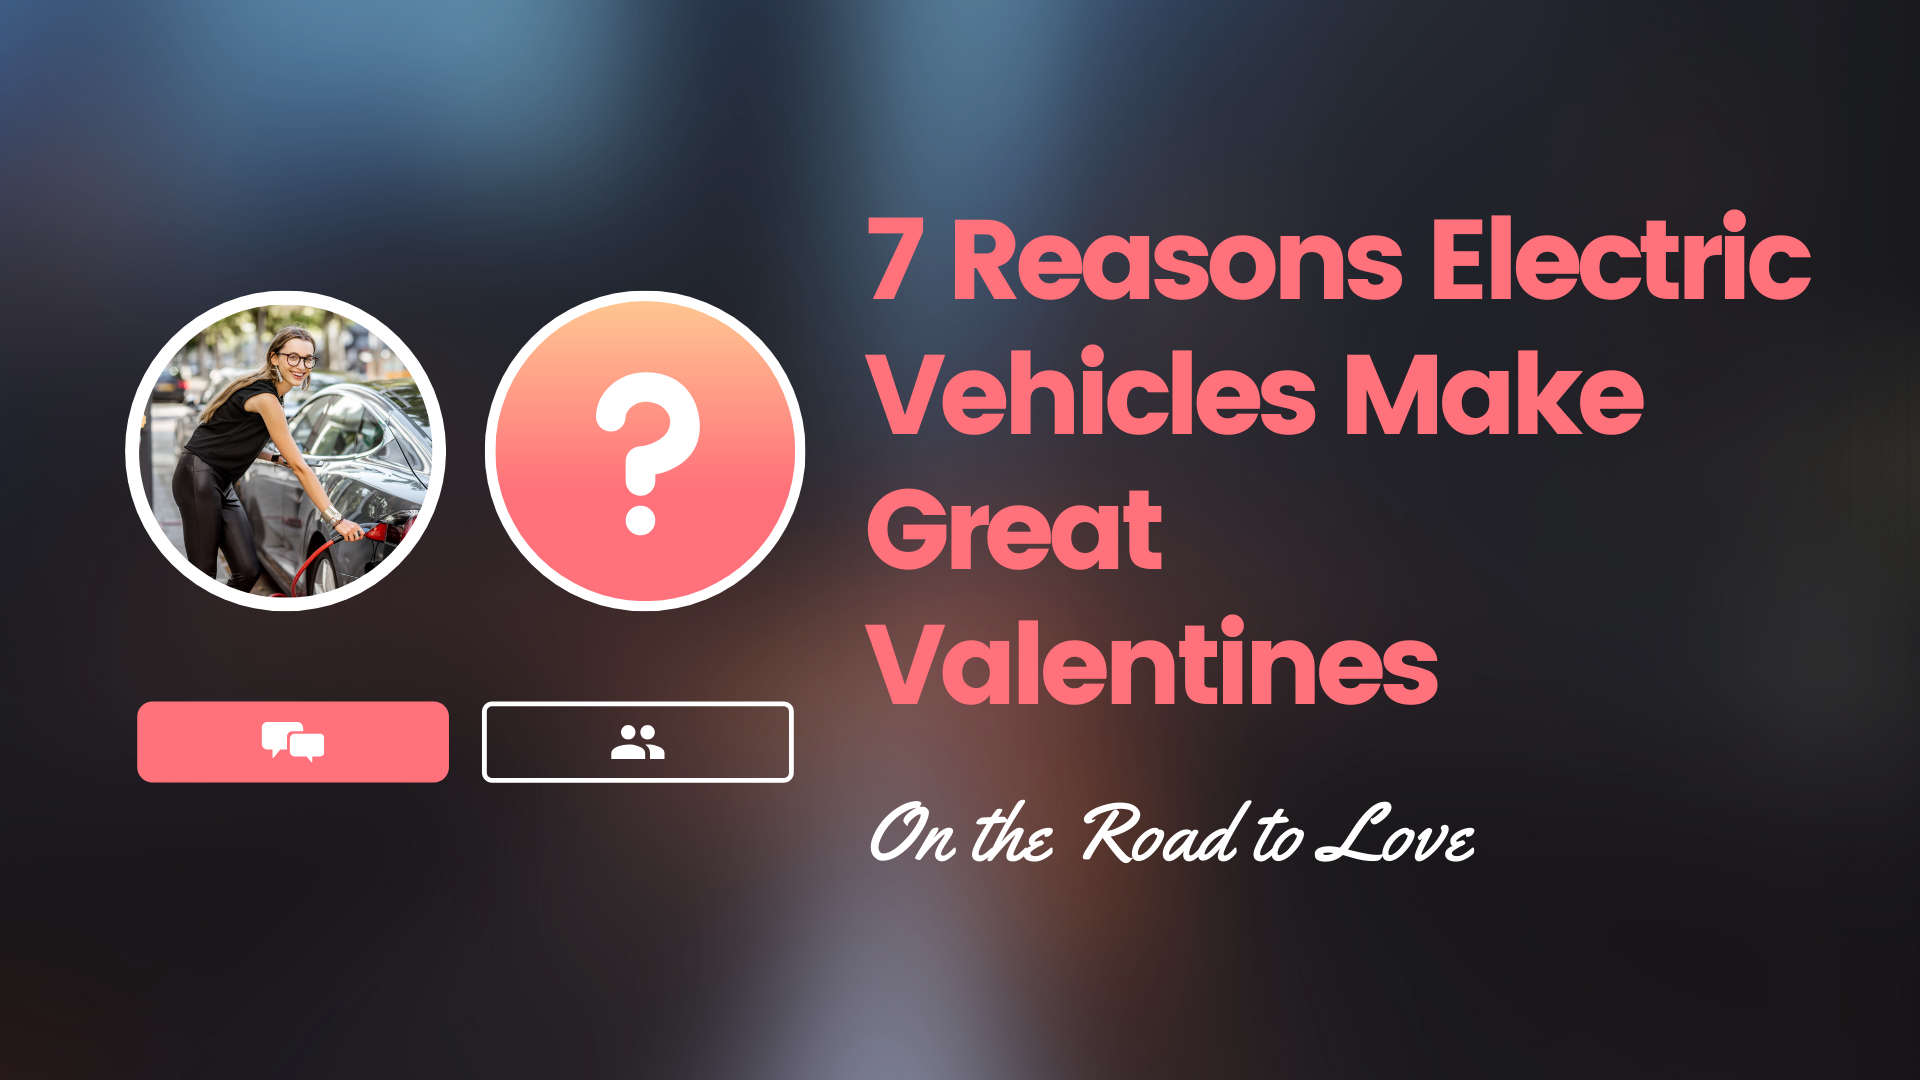 7 Reasons Electric Vehicles Make Great Valentines